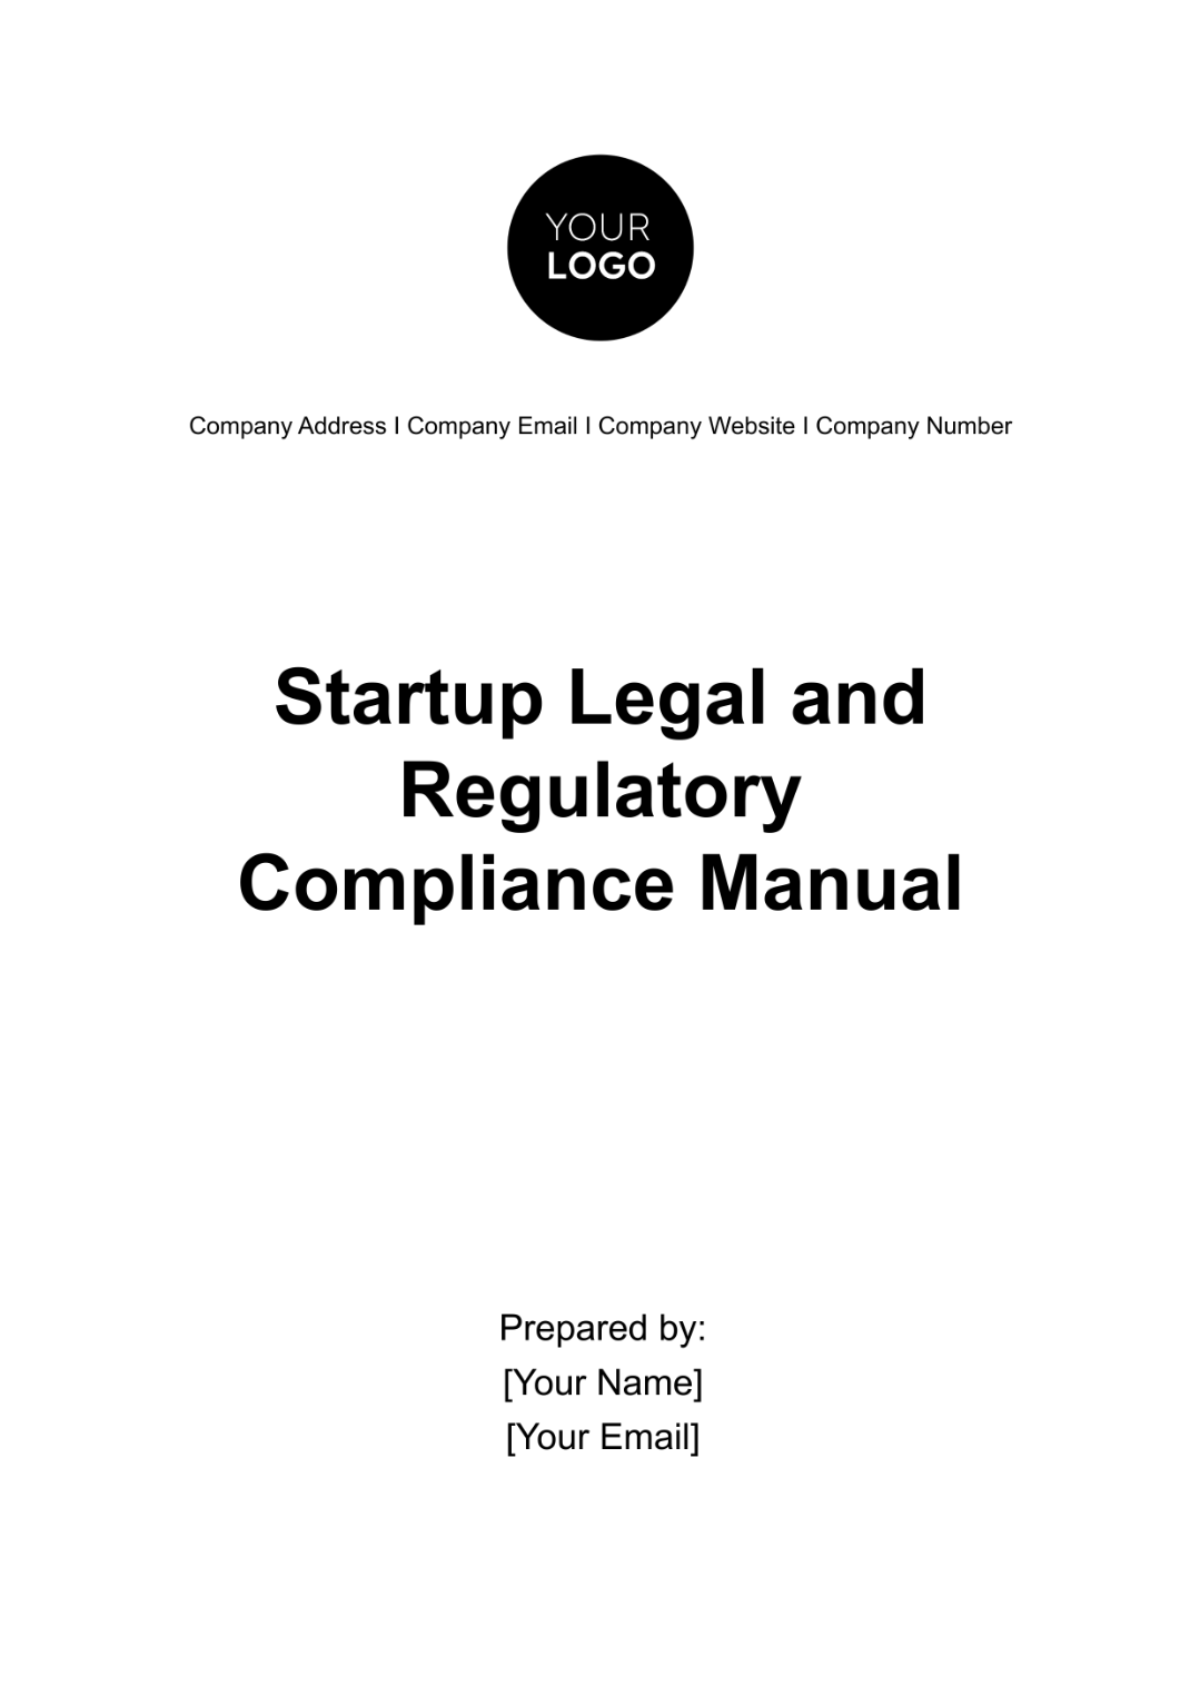 Startup Legal and Regulatory Compliance Manual Template